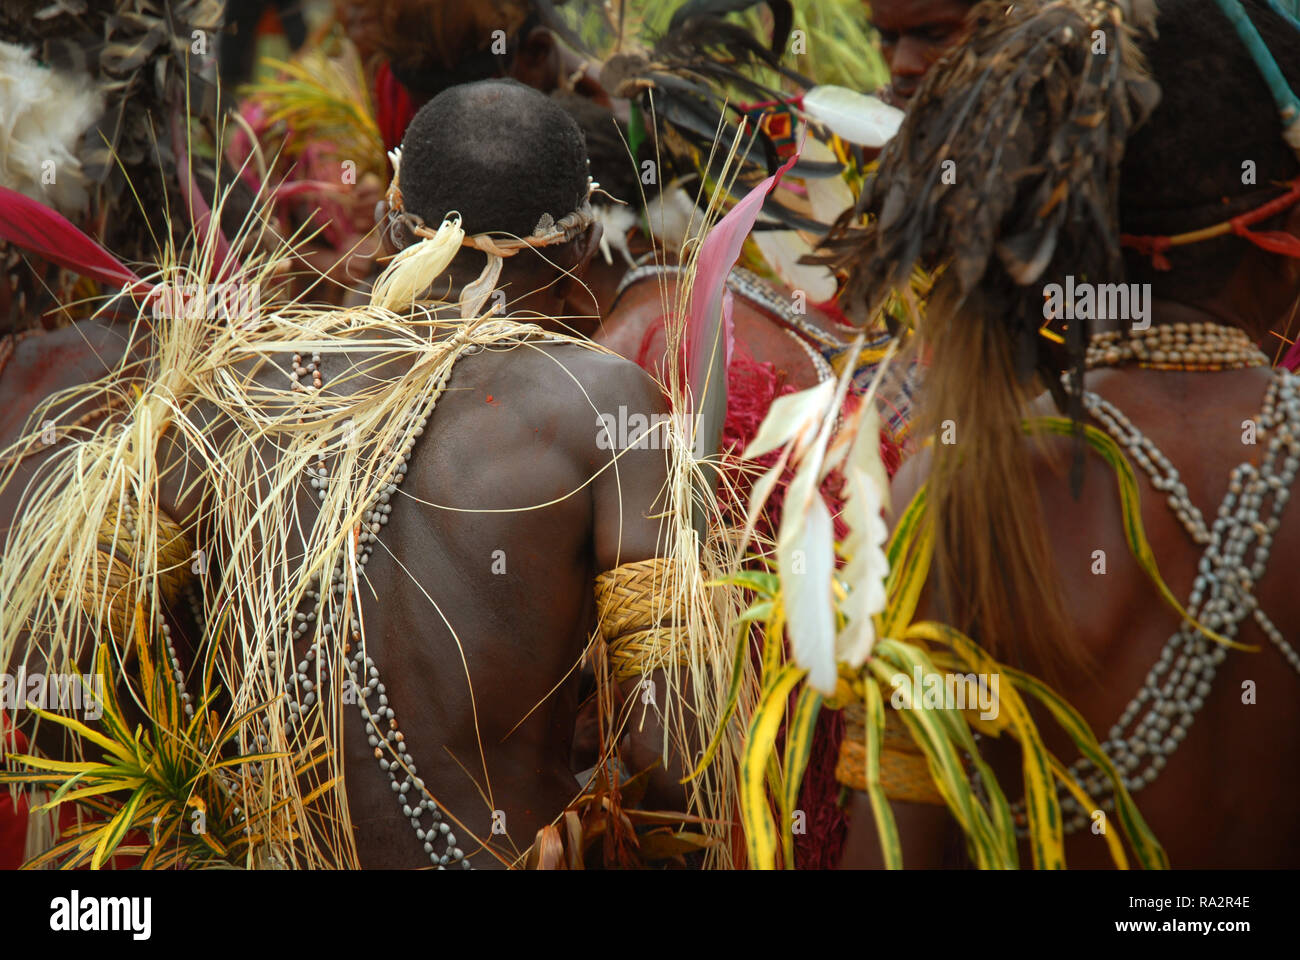 Colourfully dressed and face painted men and women decorated with shells and leaves as part of the annual Sing Sing in Madang, Papua New Guinea. Stock Photo